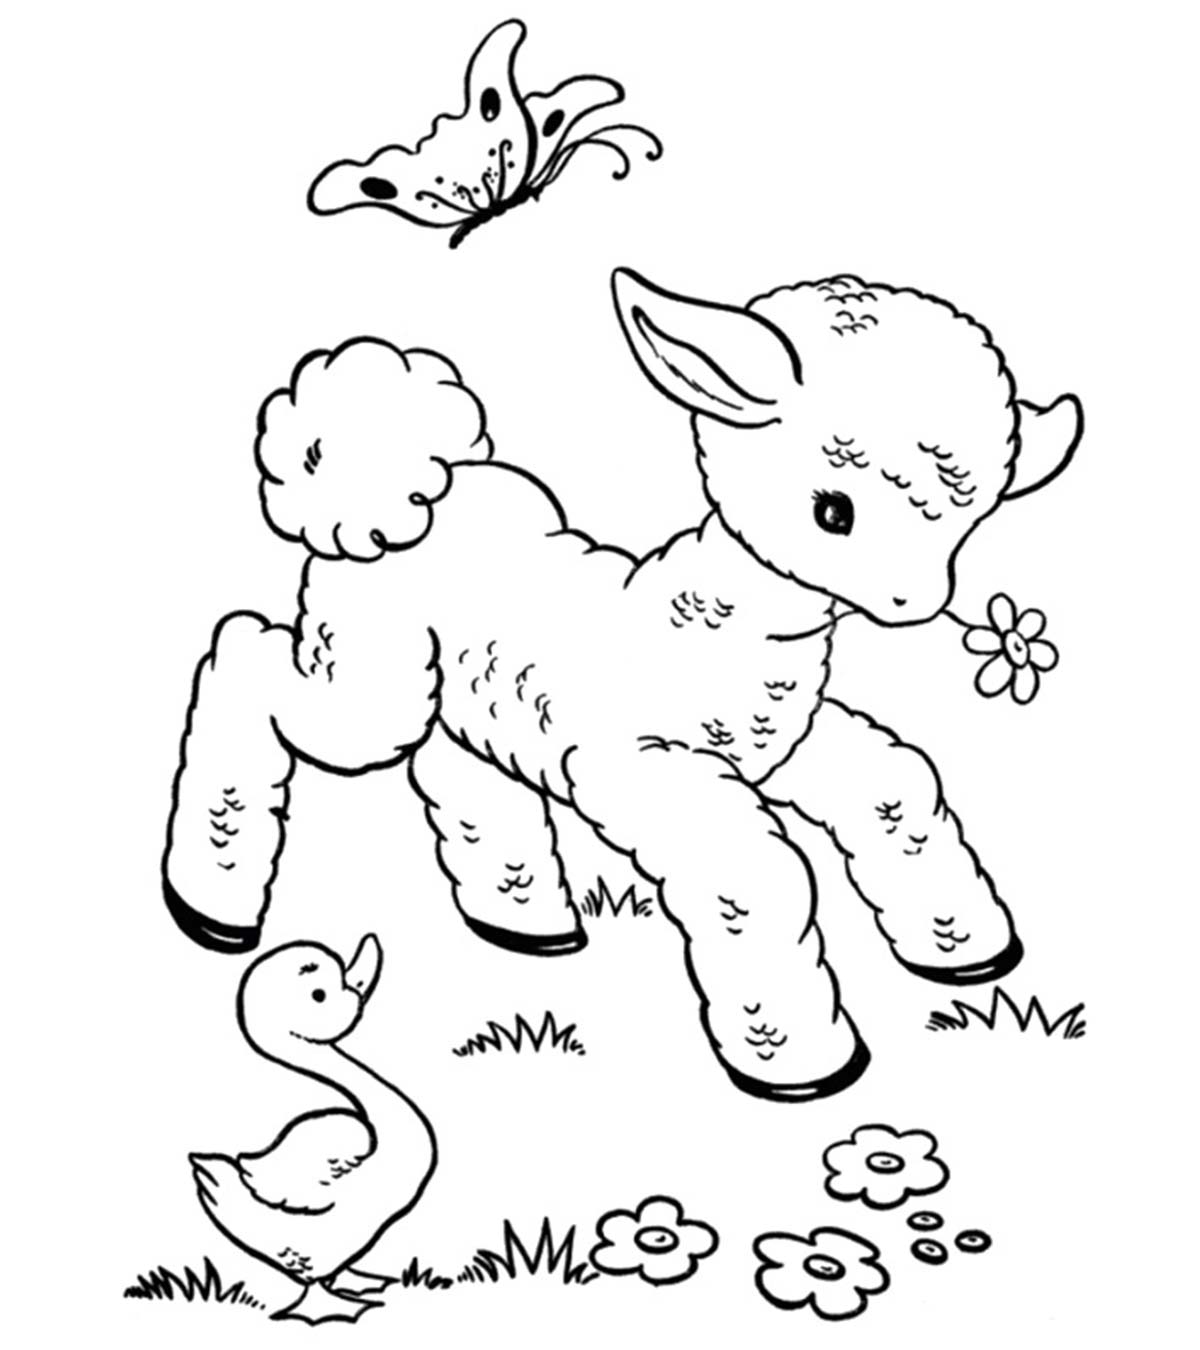 25 Funny Sheep Coloring Pages Your Toddler Will Love